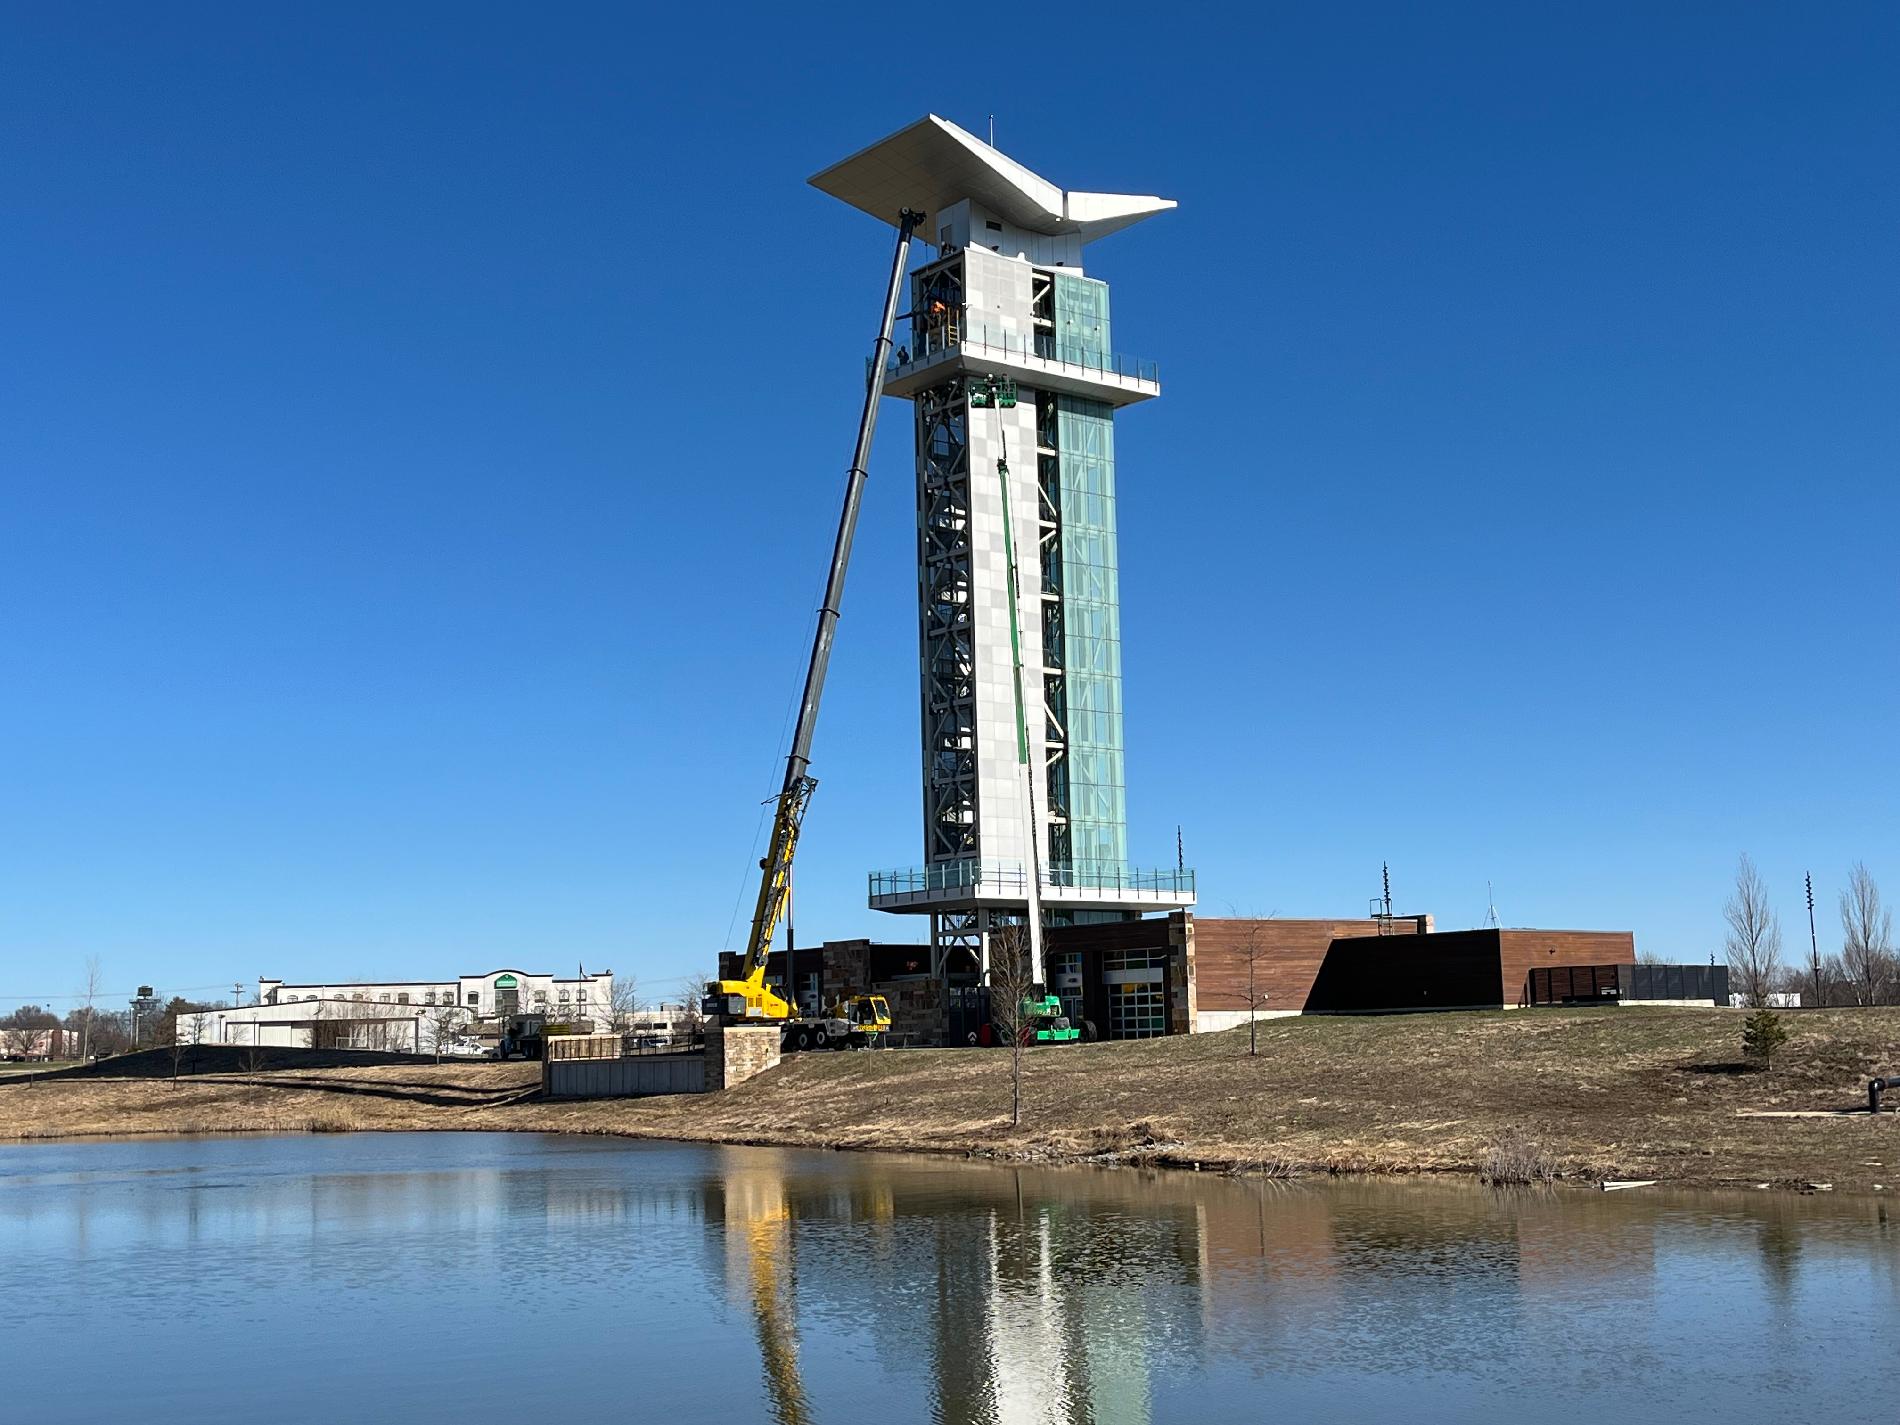 Tower with crane and pond